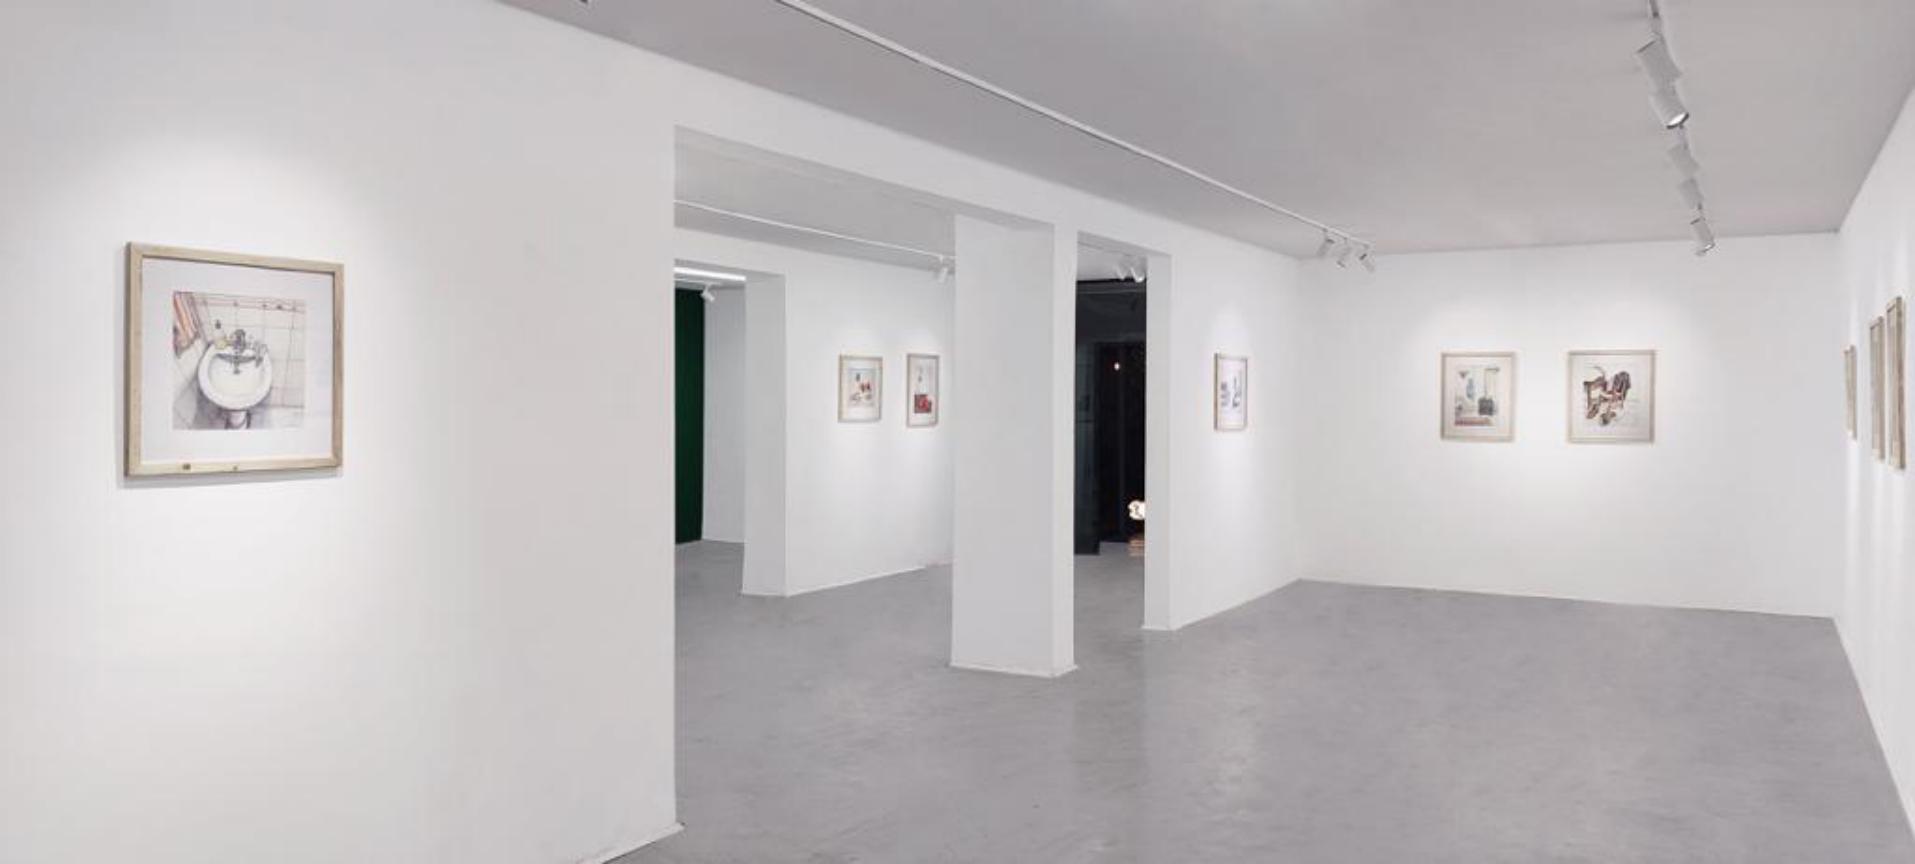 THE THINGS, Installation view	 - ALI SHAHBAZI